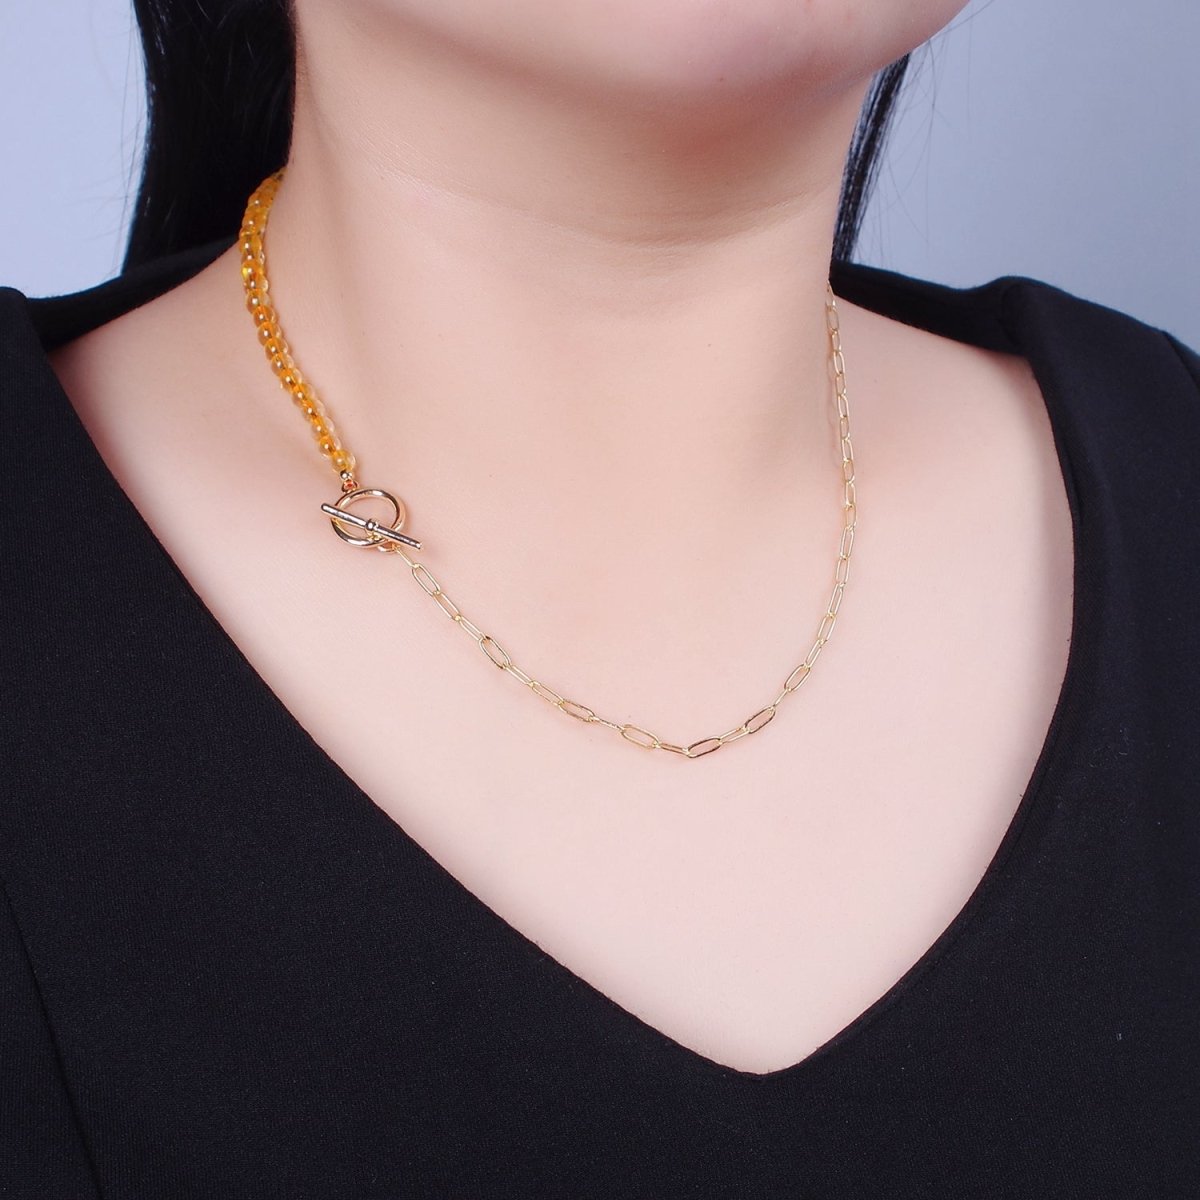 Dainty Half Bead Half Link Chain Necklace, 24k Gold Filled Paperclip Chain with Yellow Quartz Necklace | WA-963 Clearance Pricing - DLUXCA